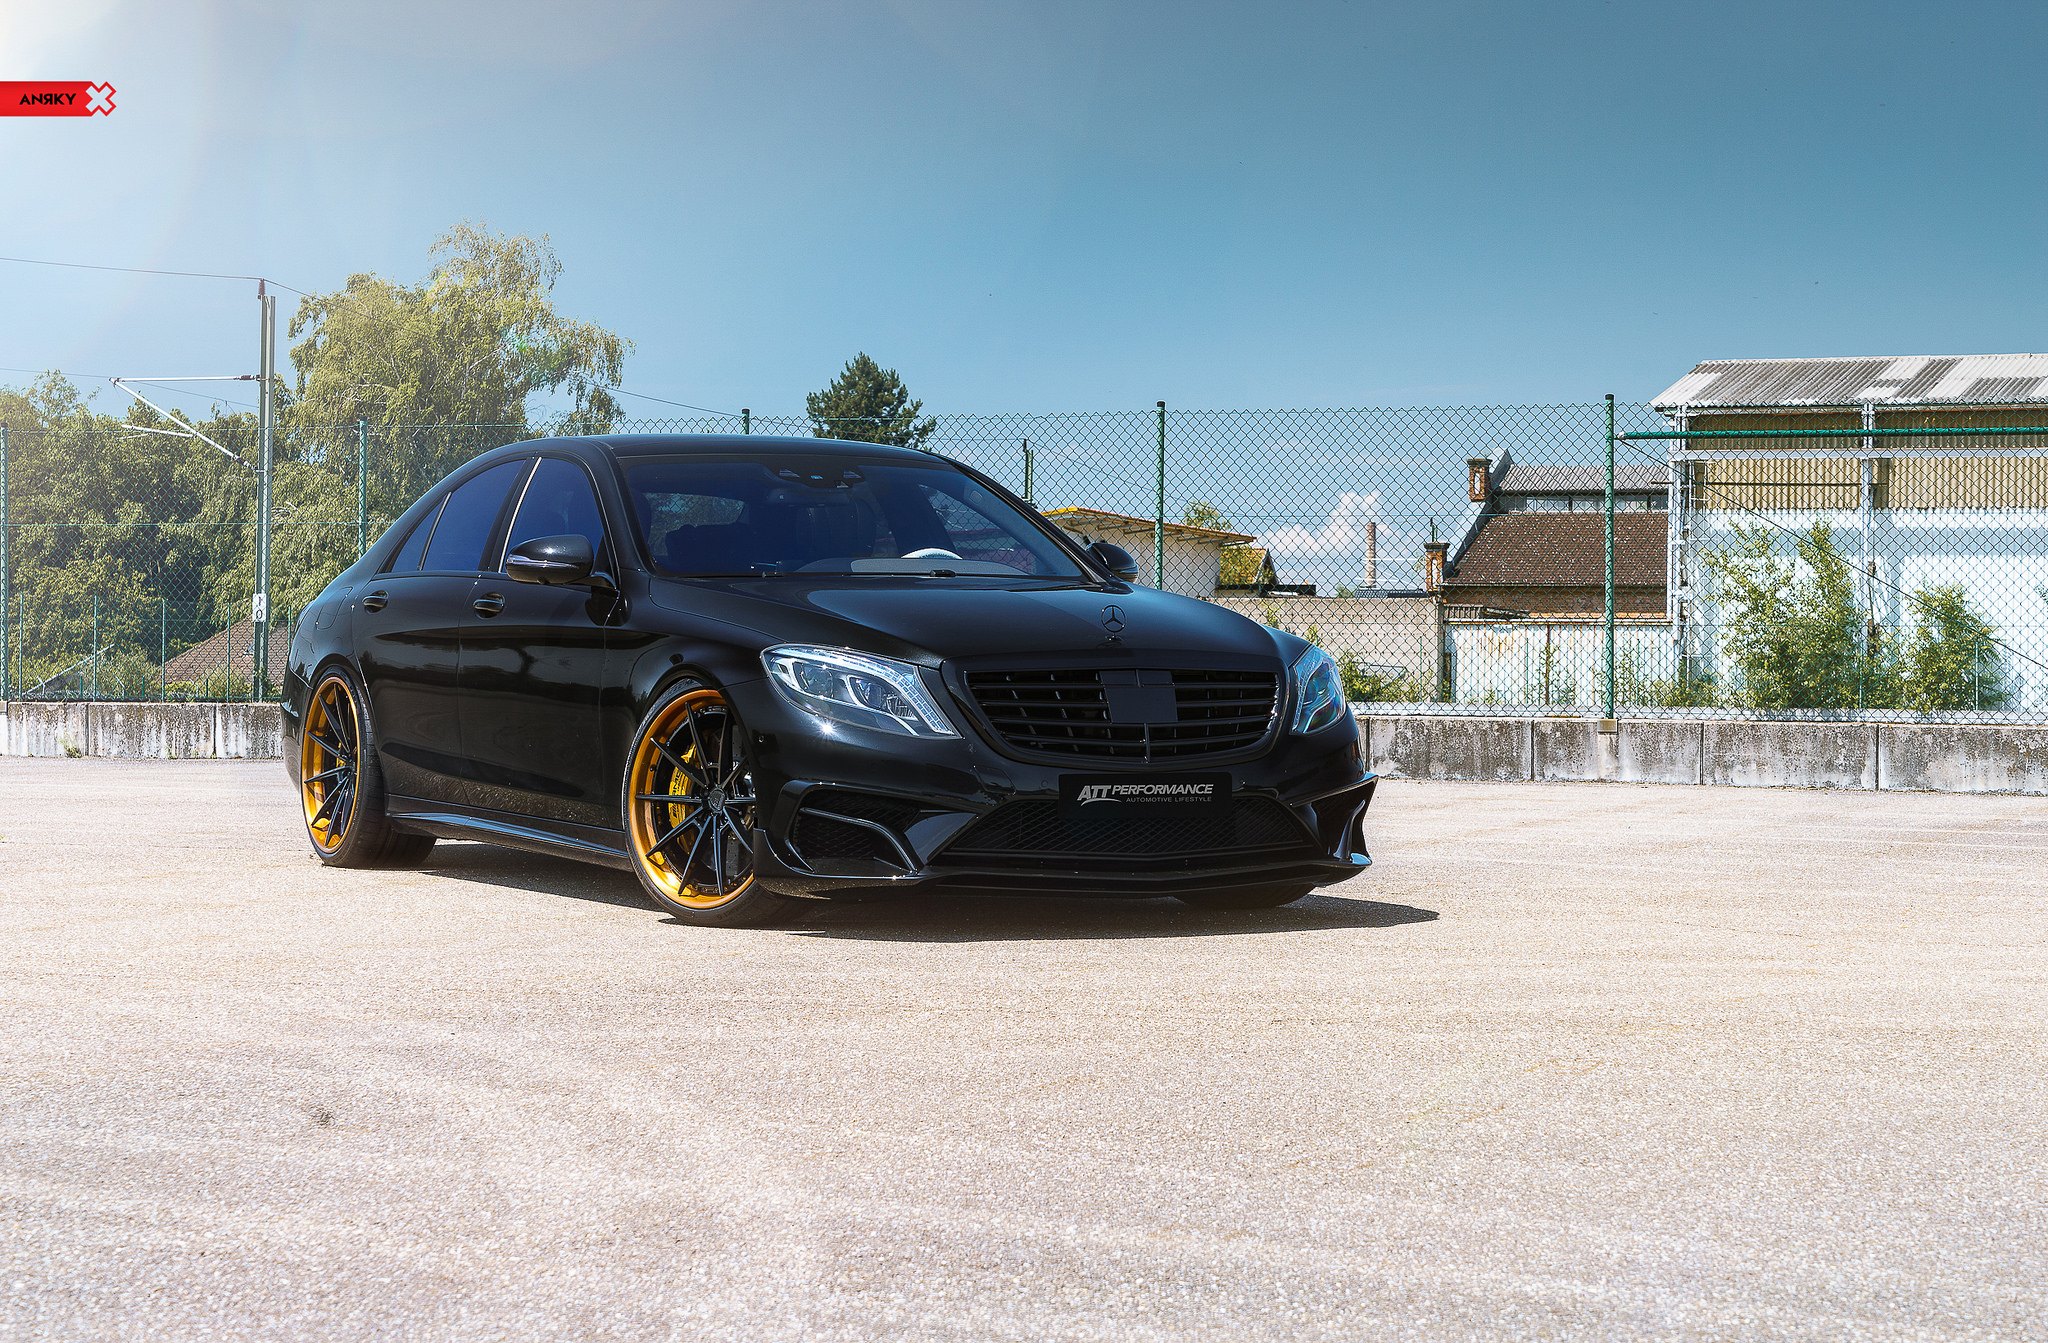 Black Mercedes S Class with Crystal Clear LED Taillights - Photo by Anrky Wheels